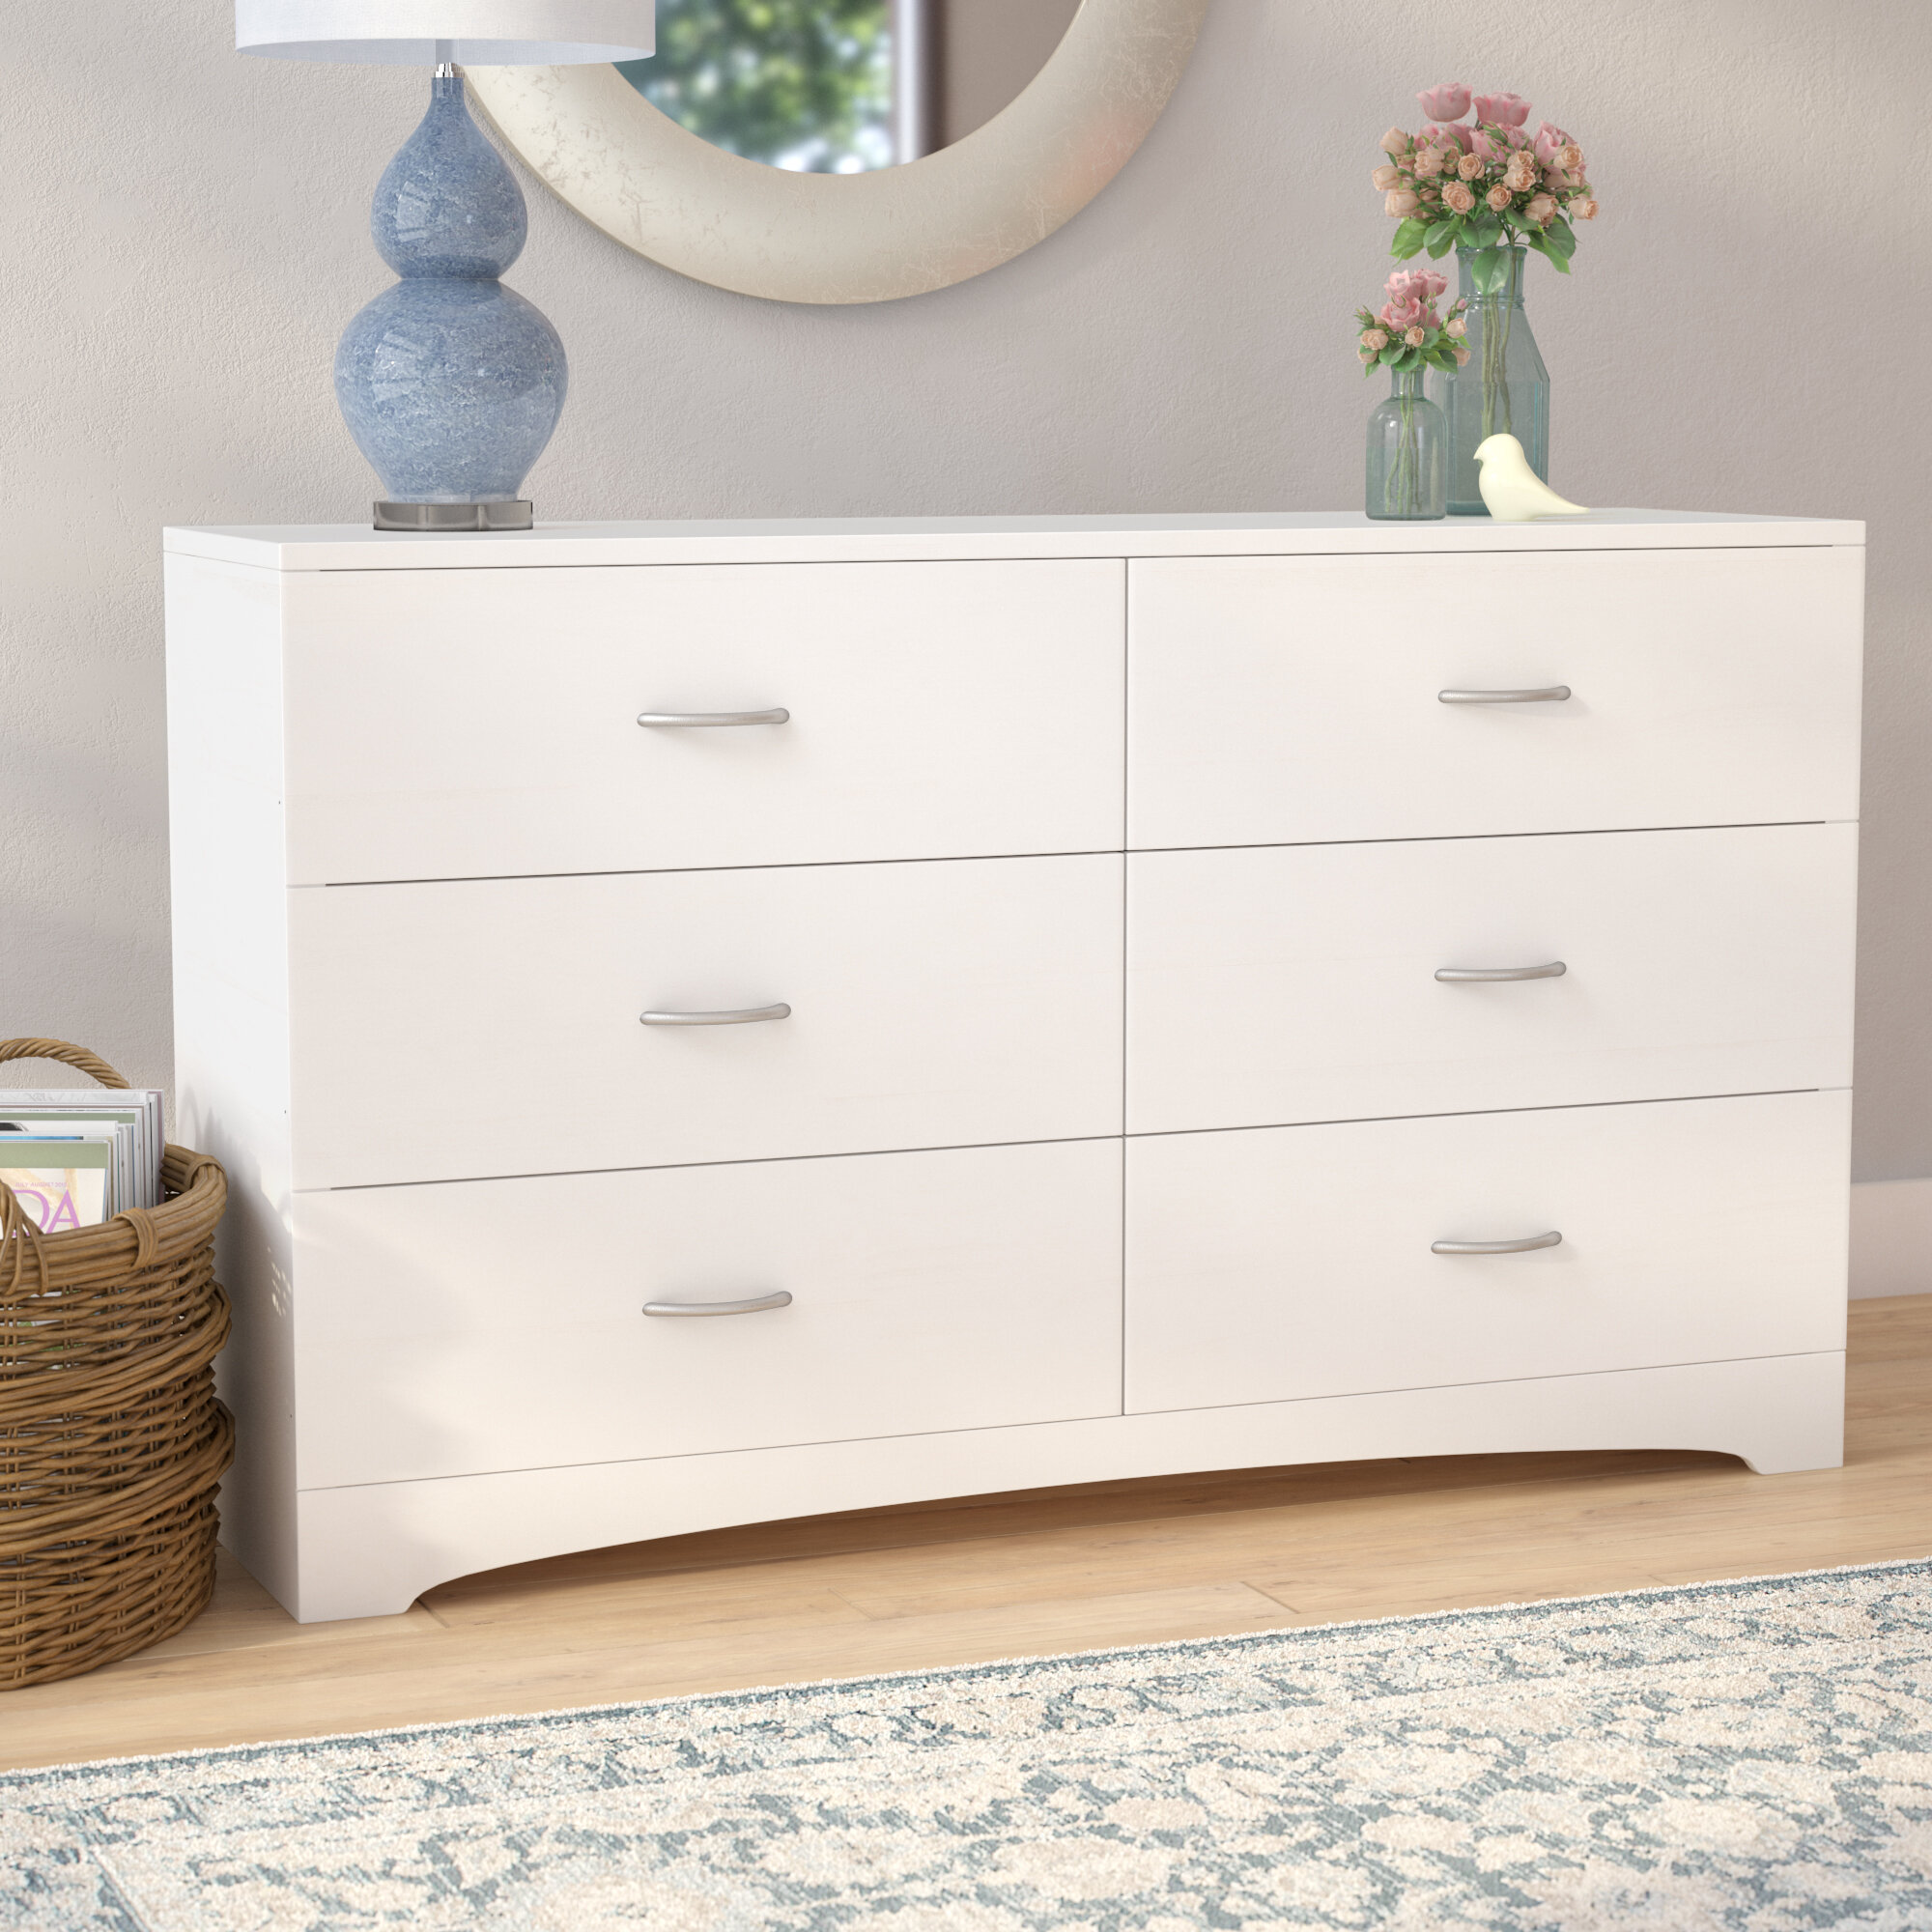 Gold White Dressers You Ll Love In 2020 Wayfair